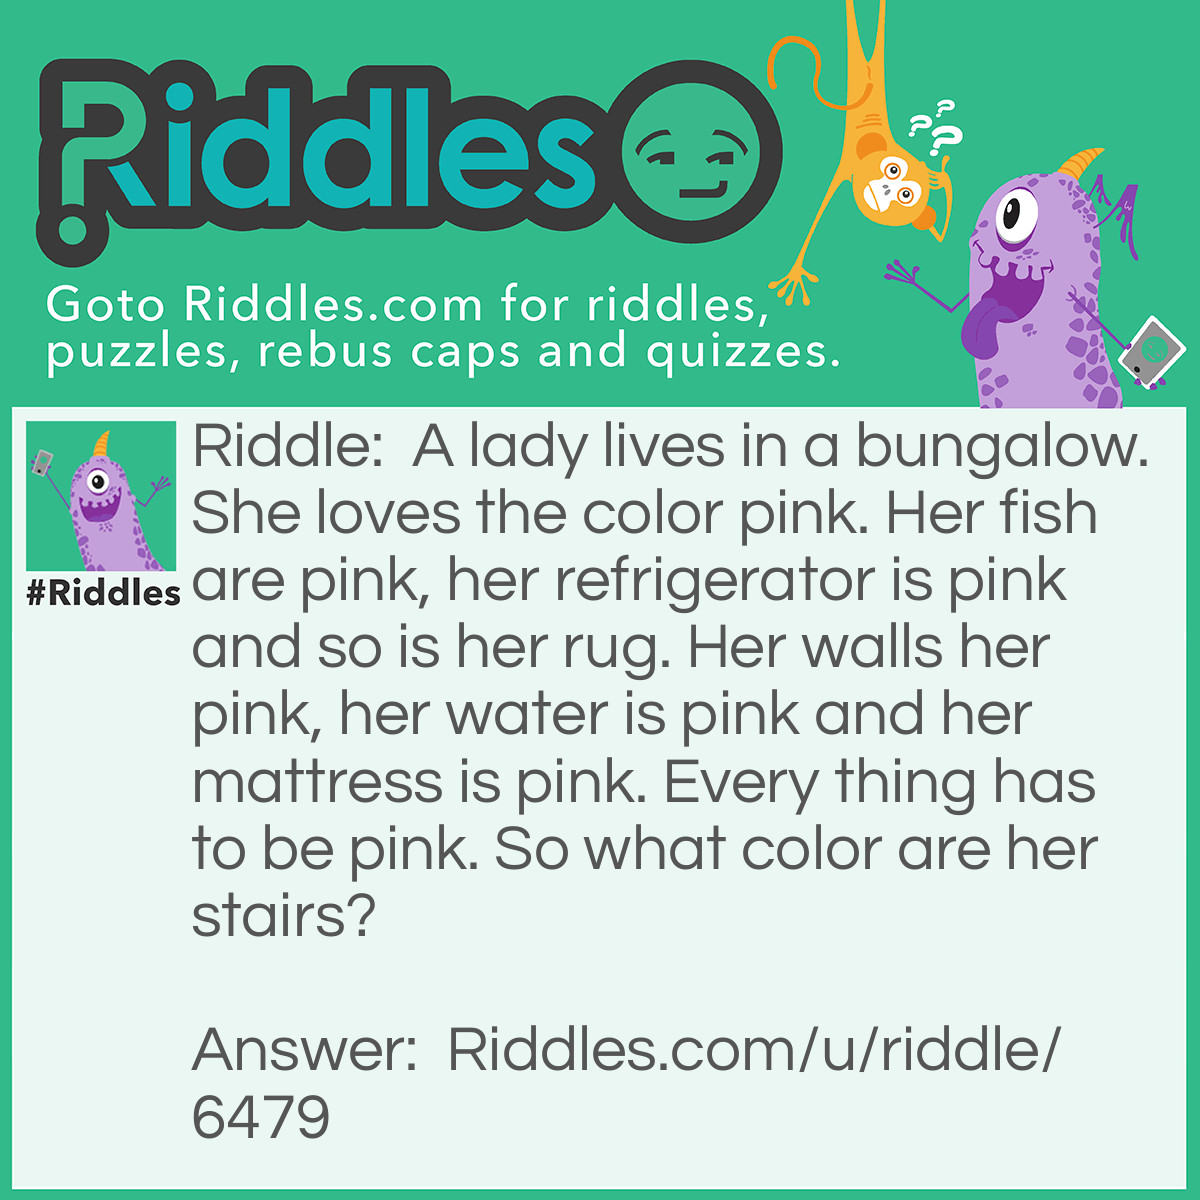 Riddle: A lady lives in a bungalow. She loves the color pink. Her fish are pink, her refrigerator is pink and so is her rug. Her walls her pink, her water is pink and her mattress is pink. Every thing has to be pink. So what color are her stairs? Answer: She doesn't have any stairs, she lives in bungalow.